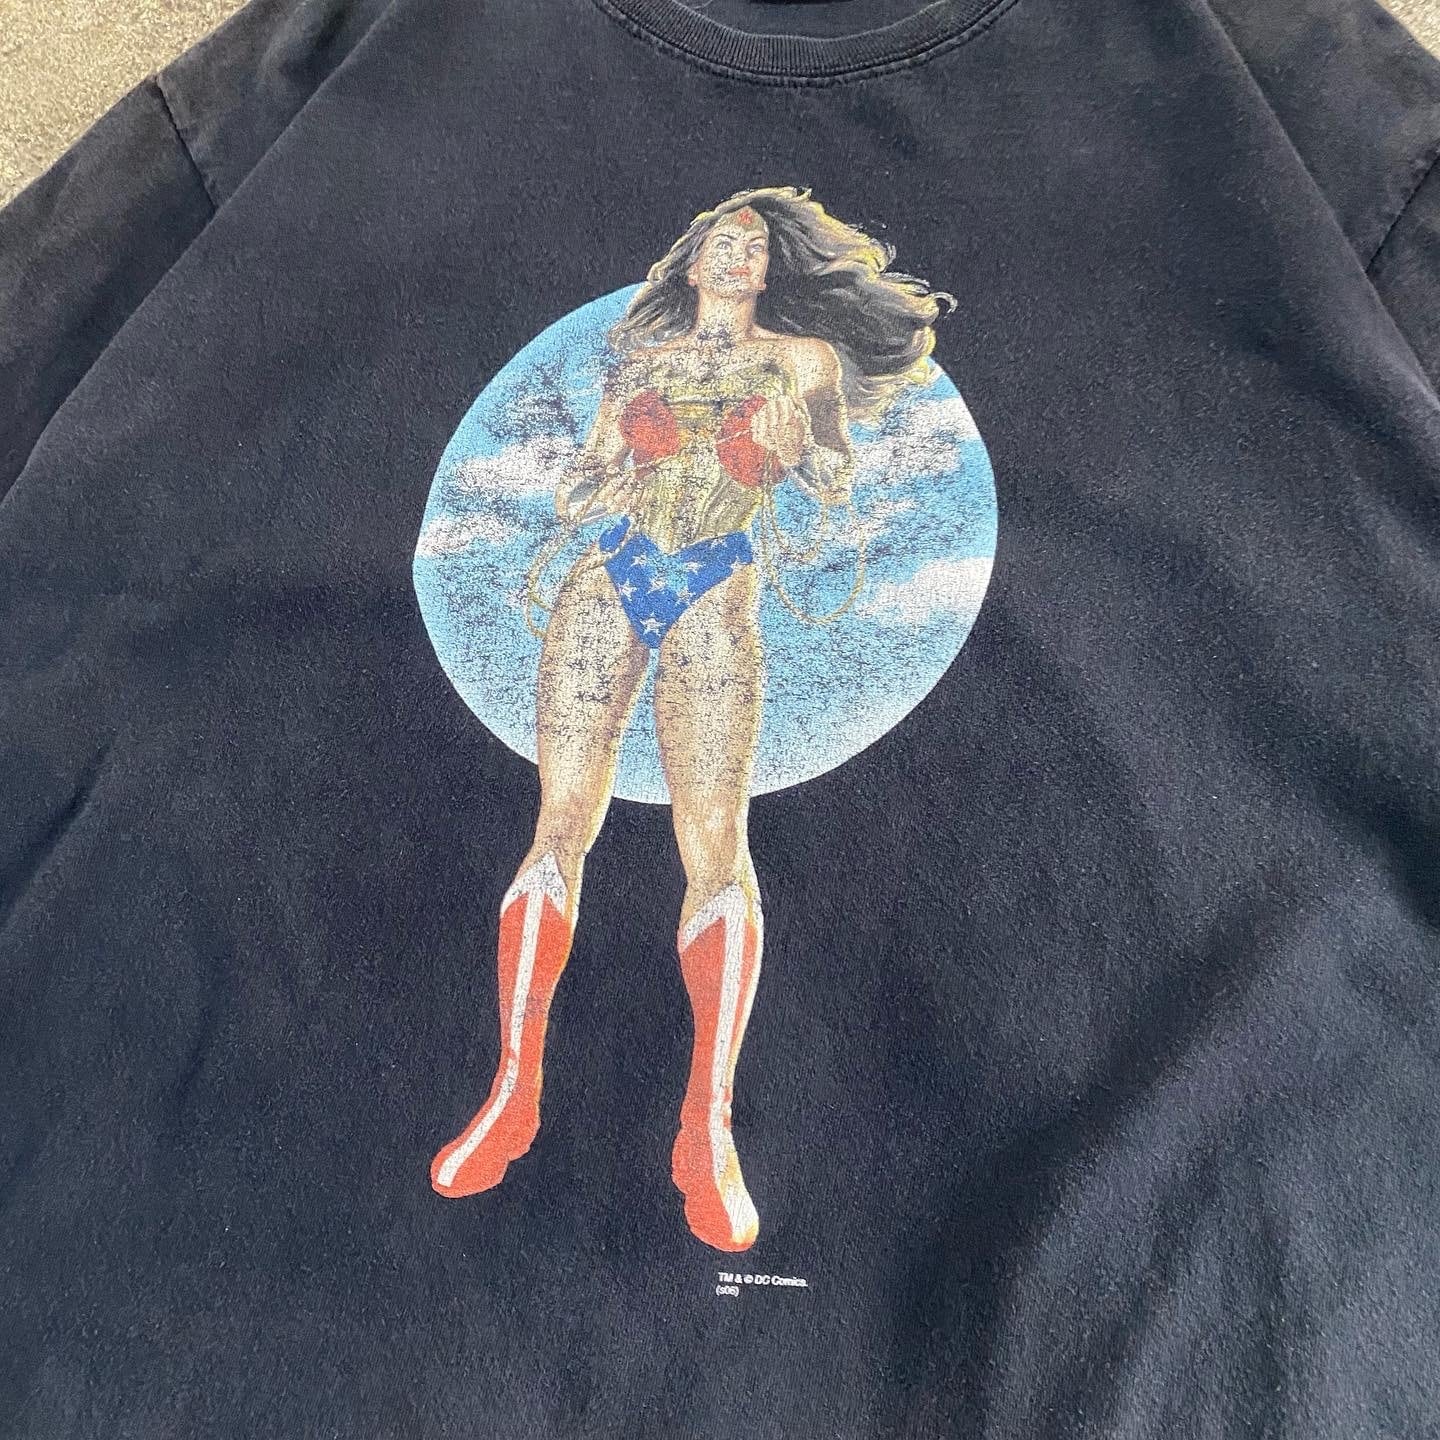 90s Wonder woman T-shirt | What'z up